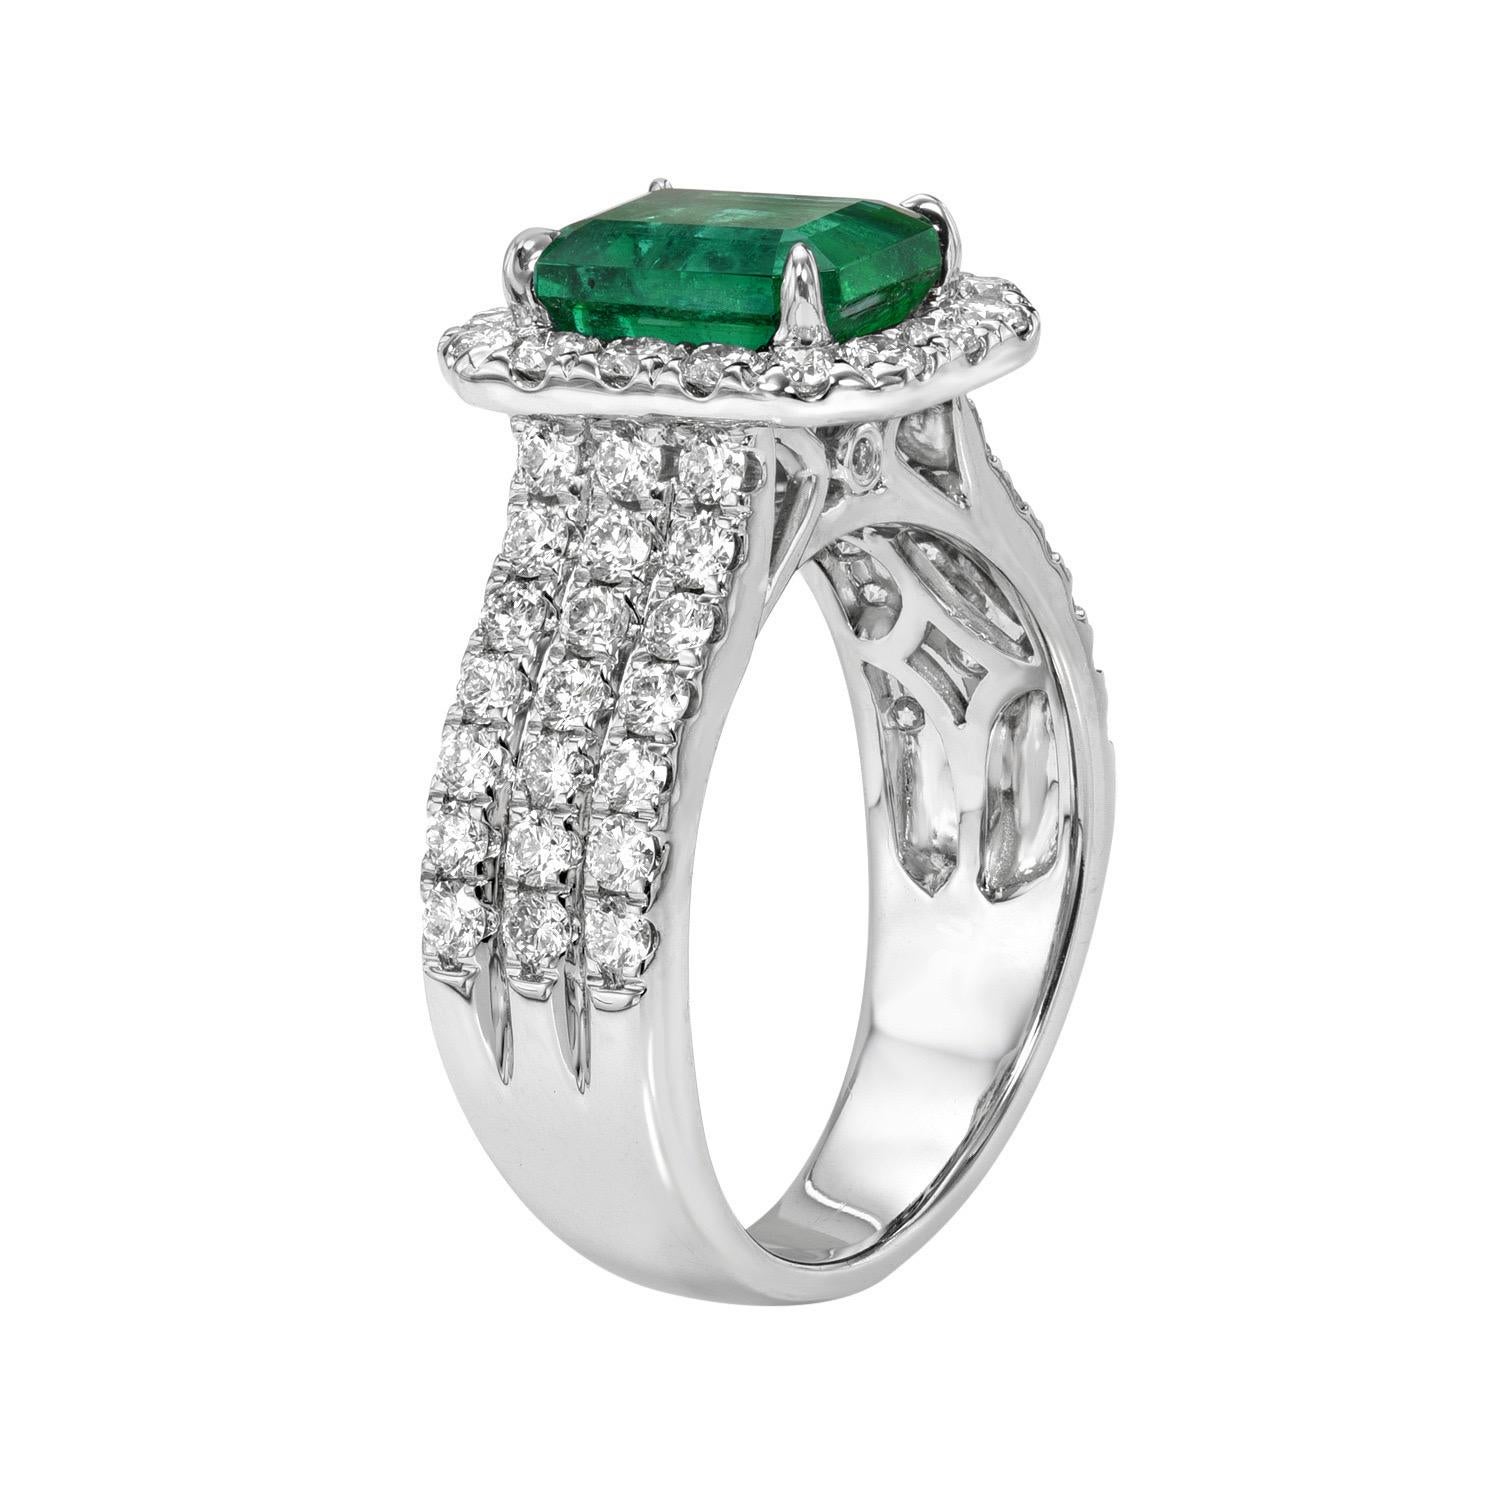 Marvelous 18K white gold ring set with a 2.05 carat Emerald-Cut Emerald, decorated with round brilliant diamonds, F-G/VS, totaling 1.35 carats.
Ring size 6.5. Resizing is complementary upon request.
Returns are accepted and paid by us within 7 days